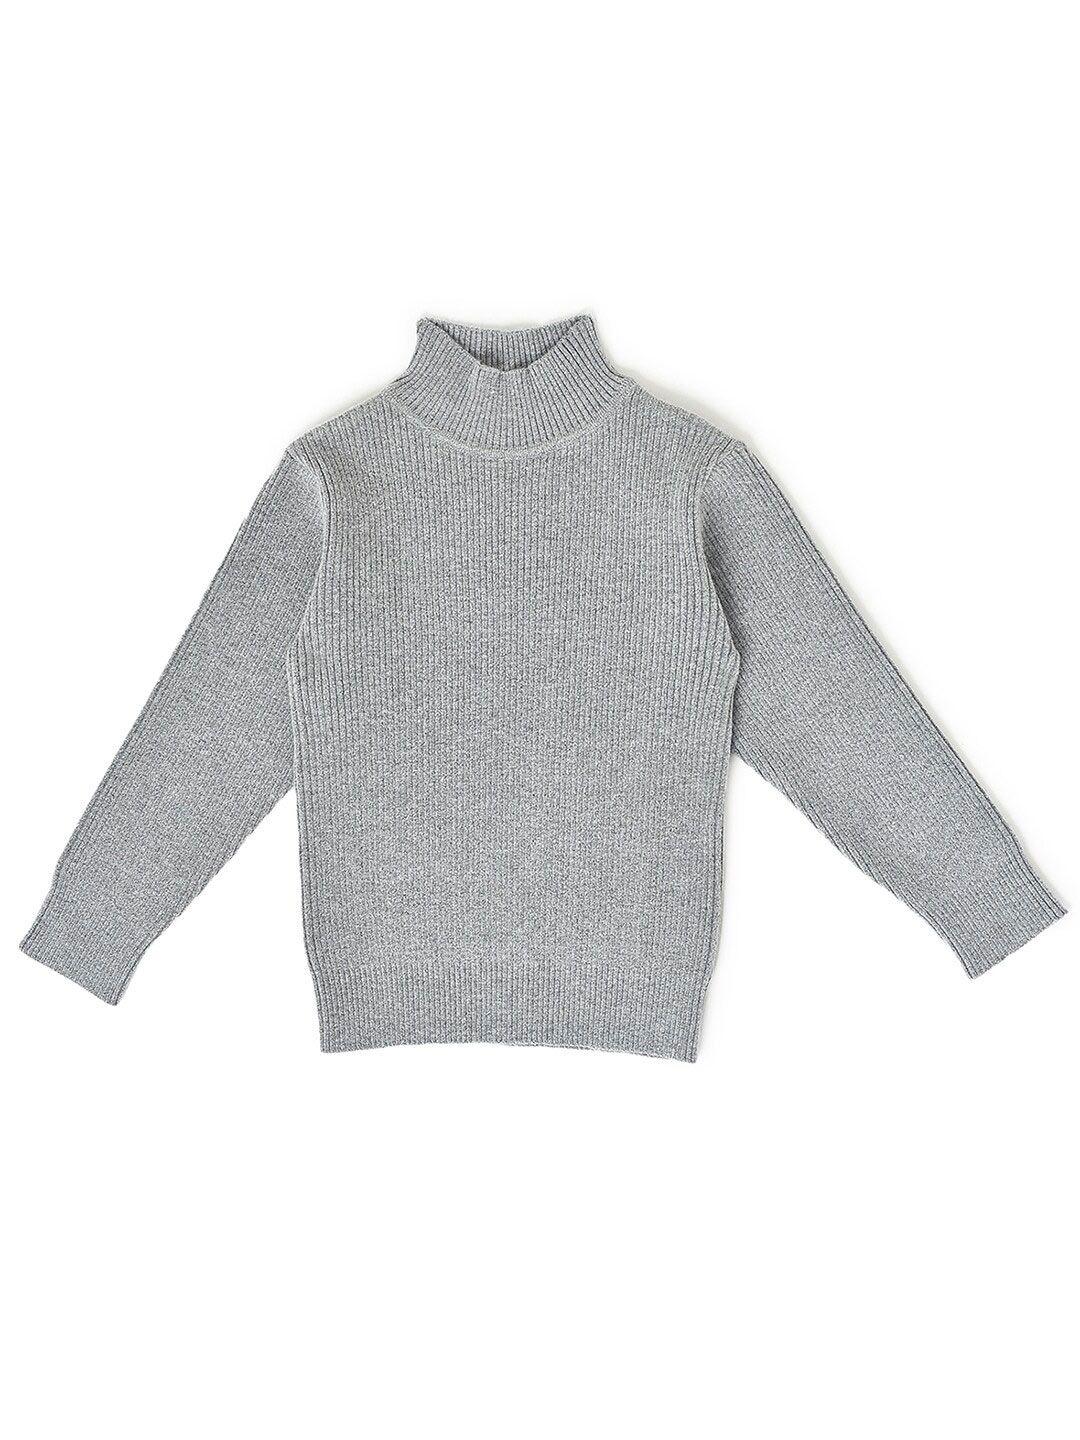 miarcus kids turtle neck ribbed pullover